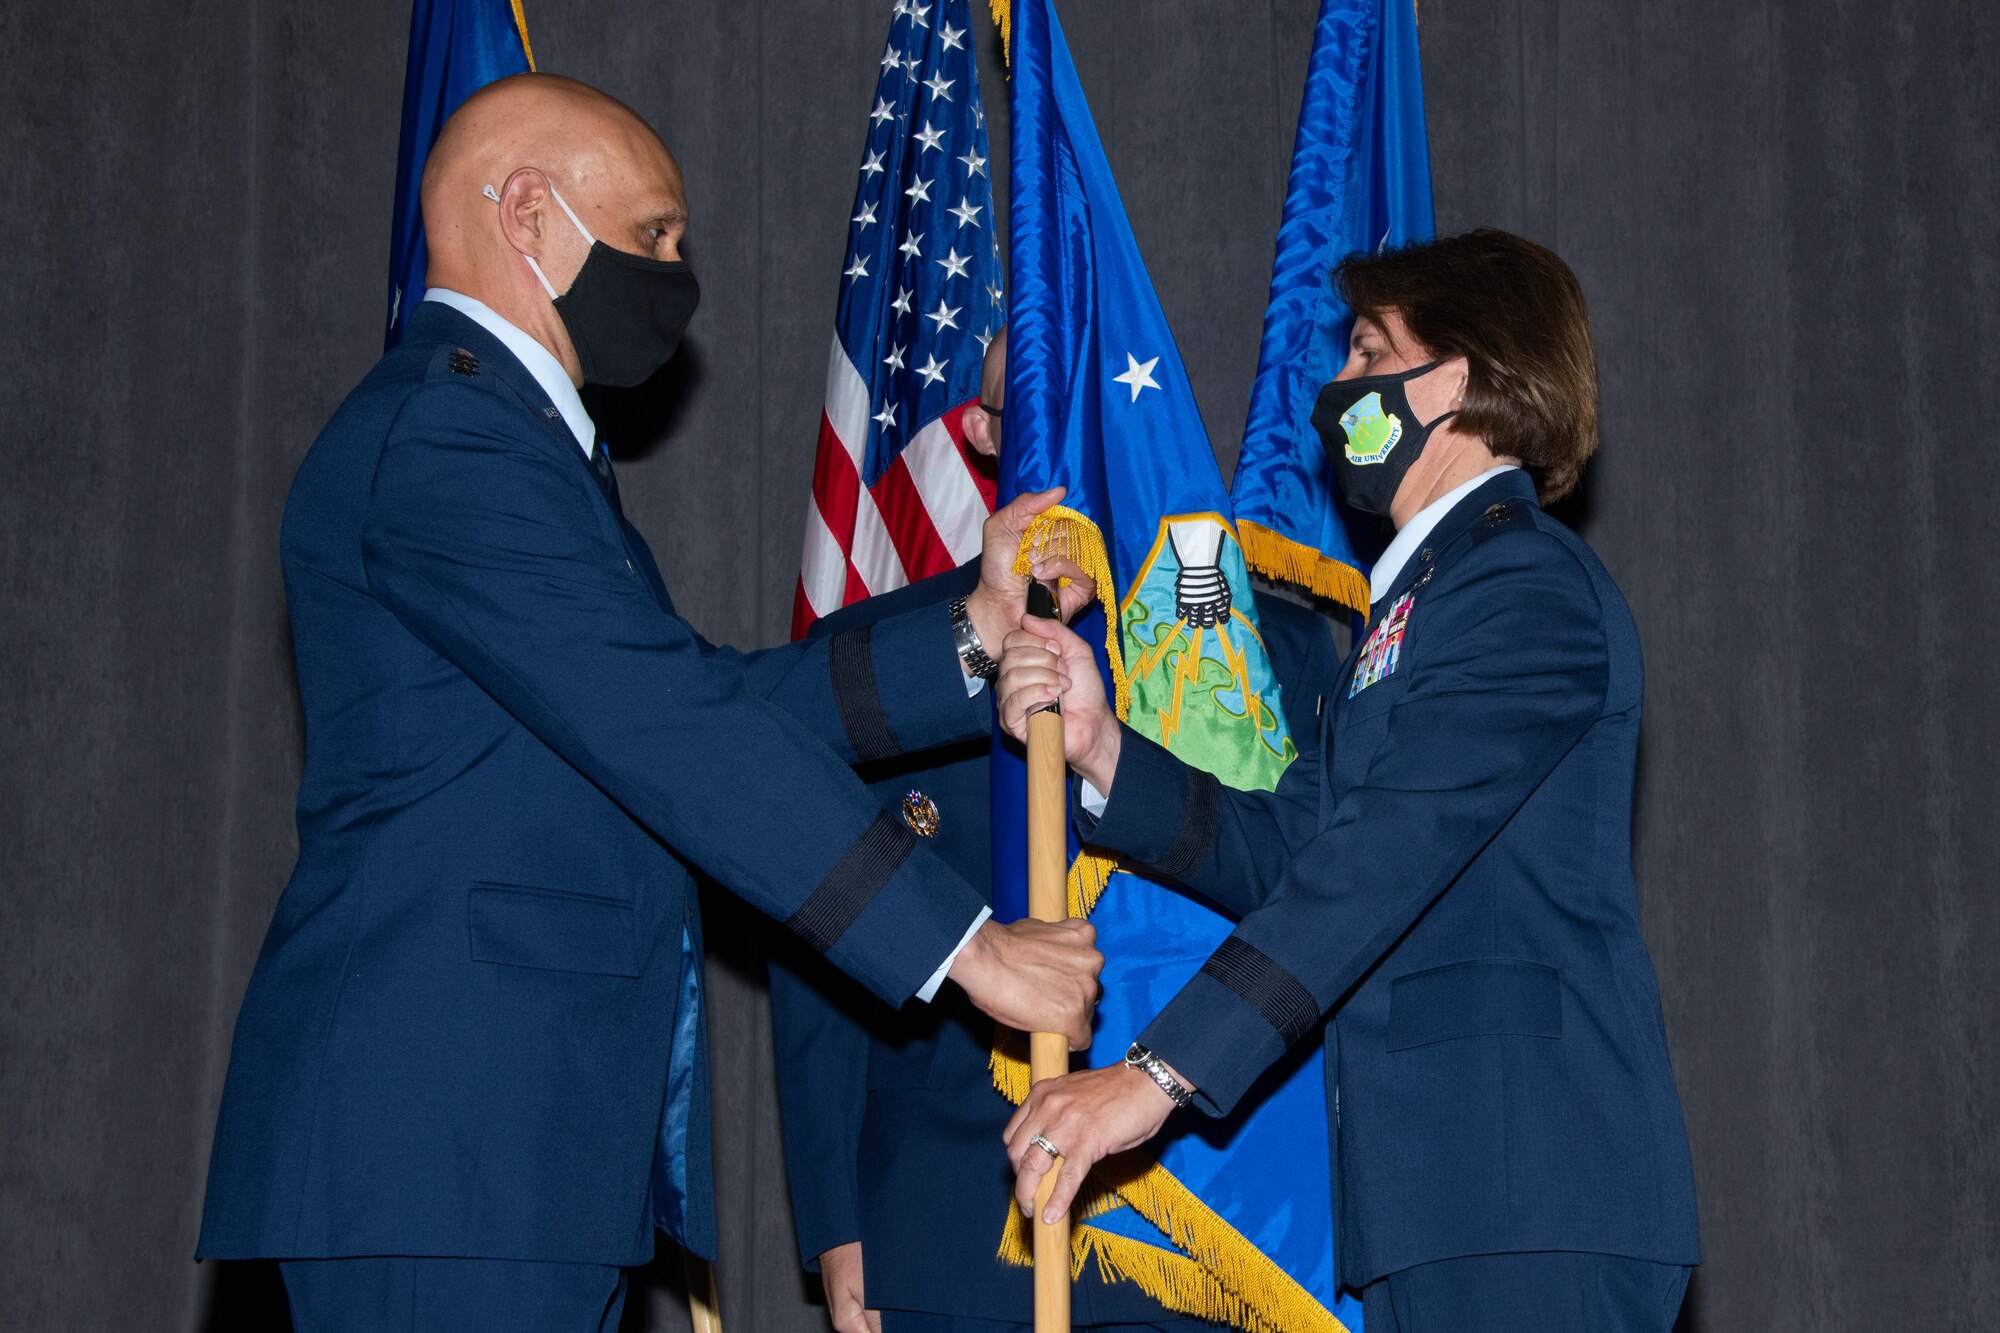 Lt. Gen. Brian Robinson, commander of Air Education and Training Command, hands the Air University guidon to Lt. Gen. Andrea Tullos during the Air University Assumption of Command Ceremony at Maxwell Air Force Base, Alabama, July 25, 2022. Tullos served as the commander of Maxwell’s 42nd Air Base Wing from 2014 to 2016, and before assuming command of Air University, she was the deputy commander of AETC. (U.S. Air Force photo by Melanie Rodgers Cox)